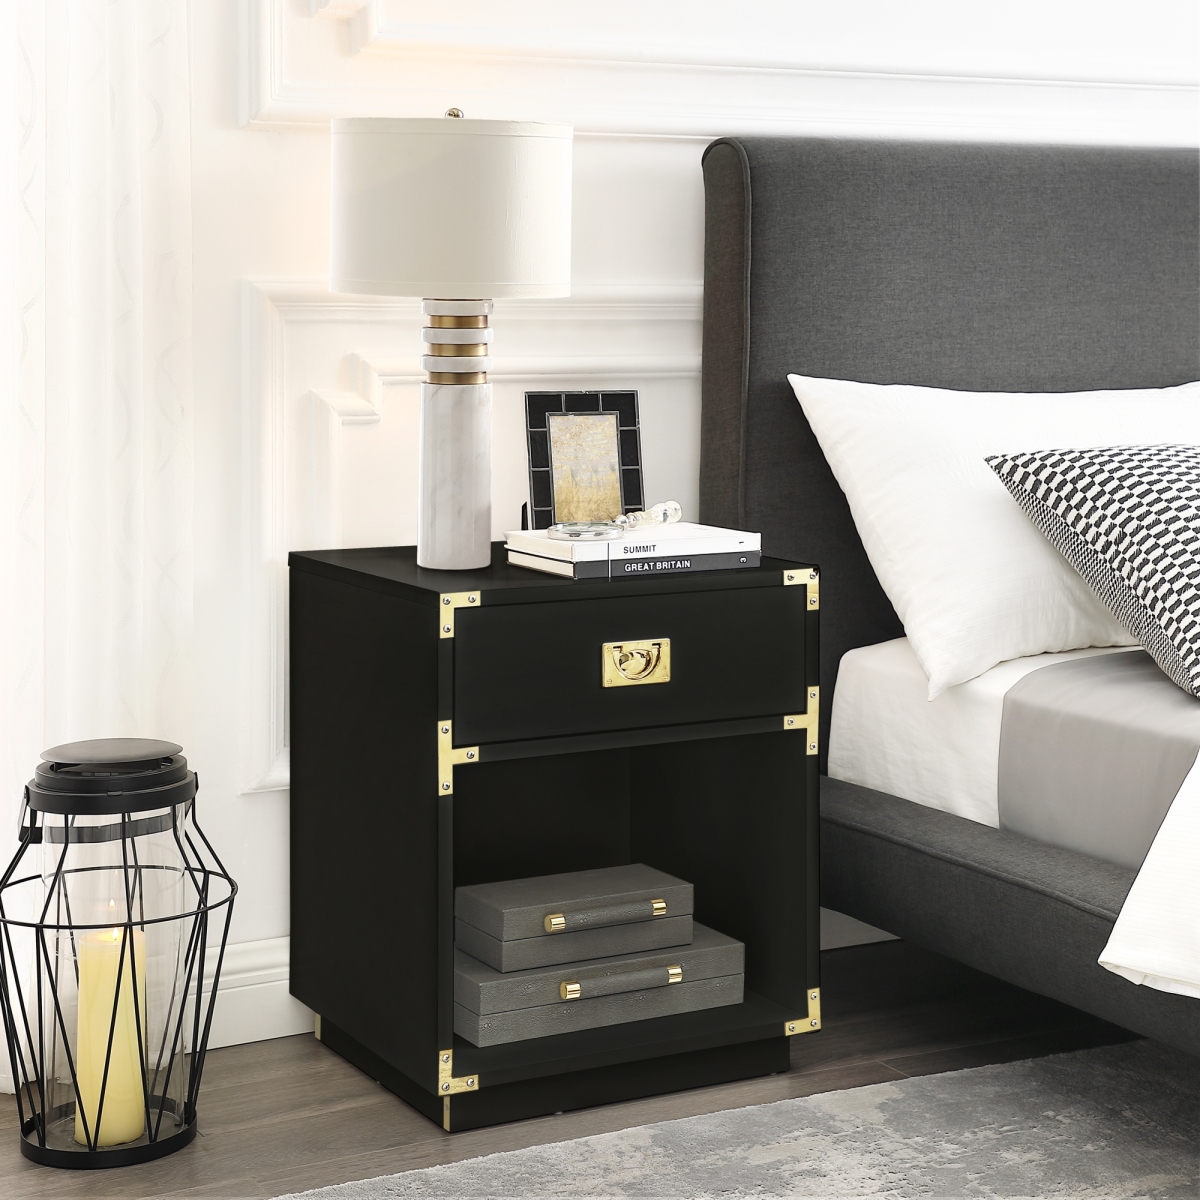 St154-09bk-ue Posh Living Angela Side Table, Accent Table & Nightstand, Black - 20 X 18 X 24 In.